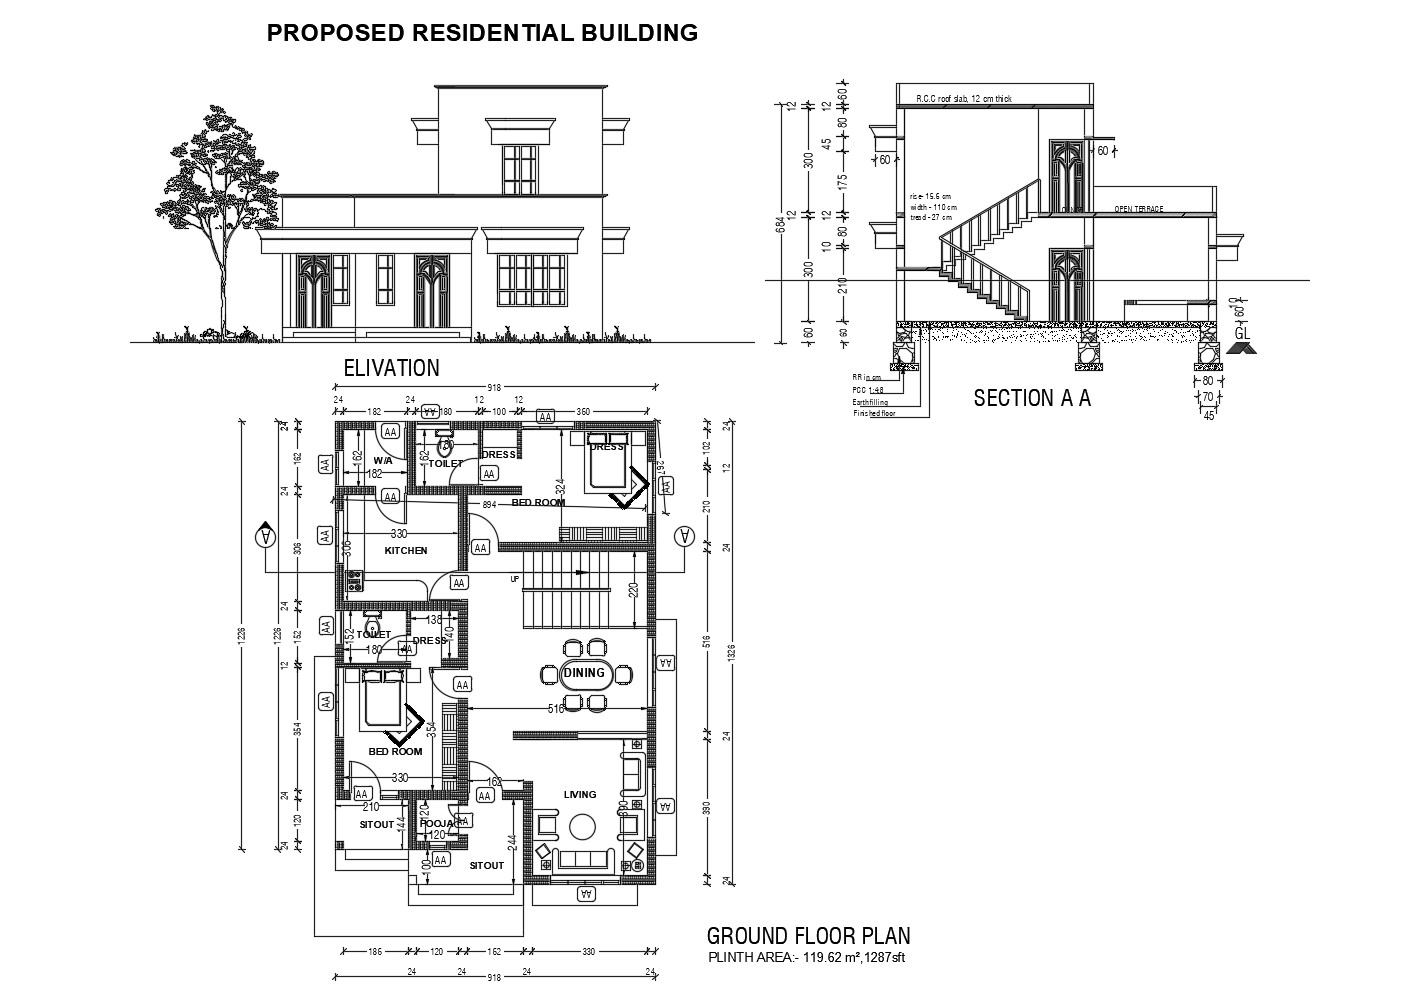 Ground floor plan of residential house 9.18mtr x 13.26mtr